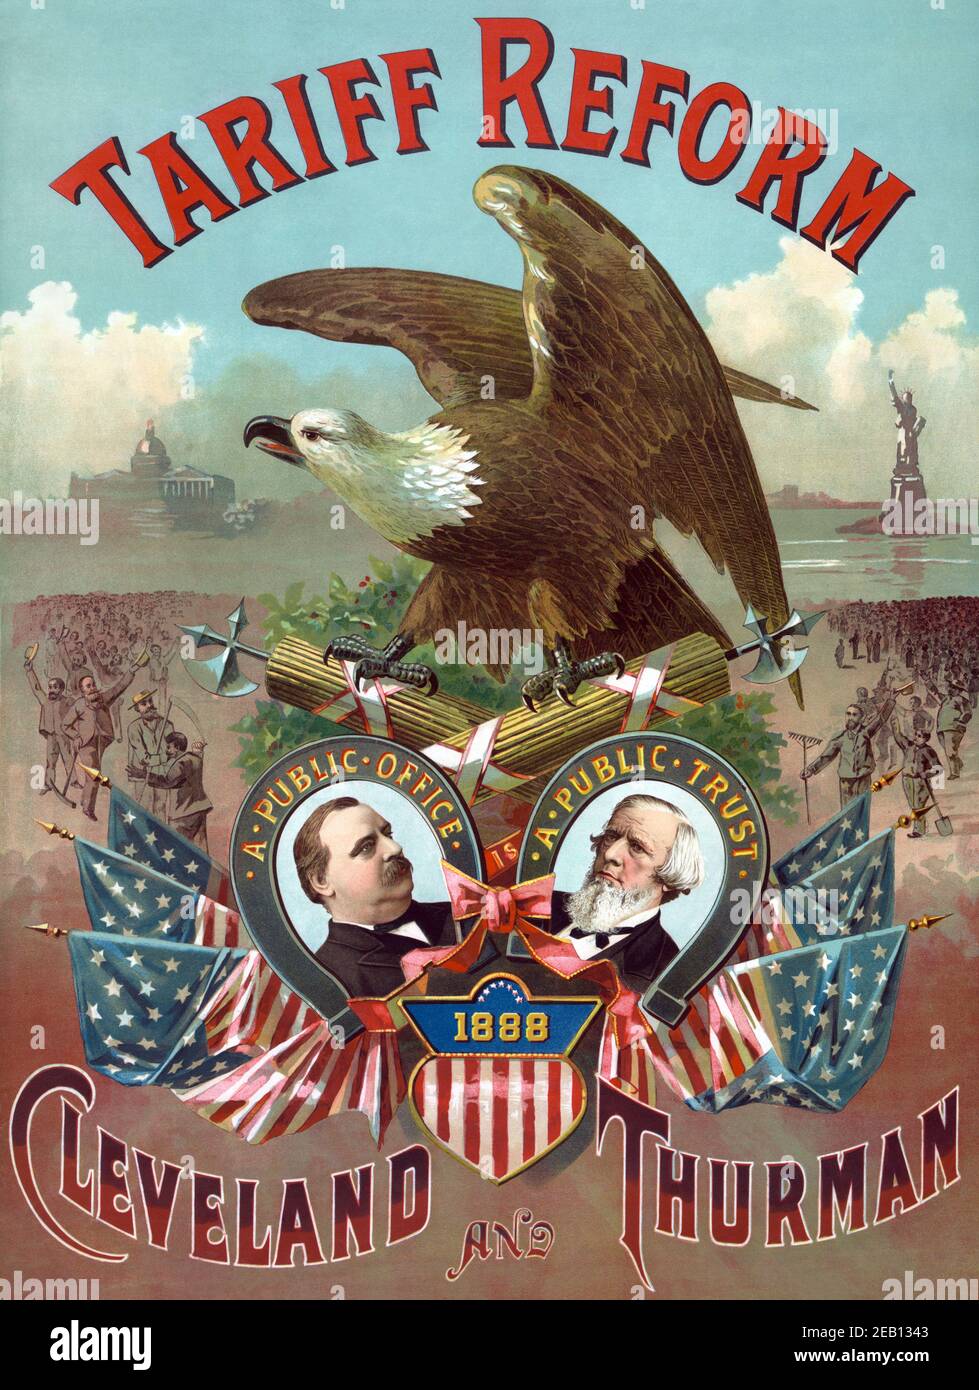 Tariff Reform. Cleveland and Thurman 1888 Stock Photo